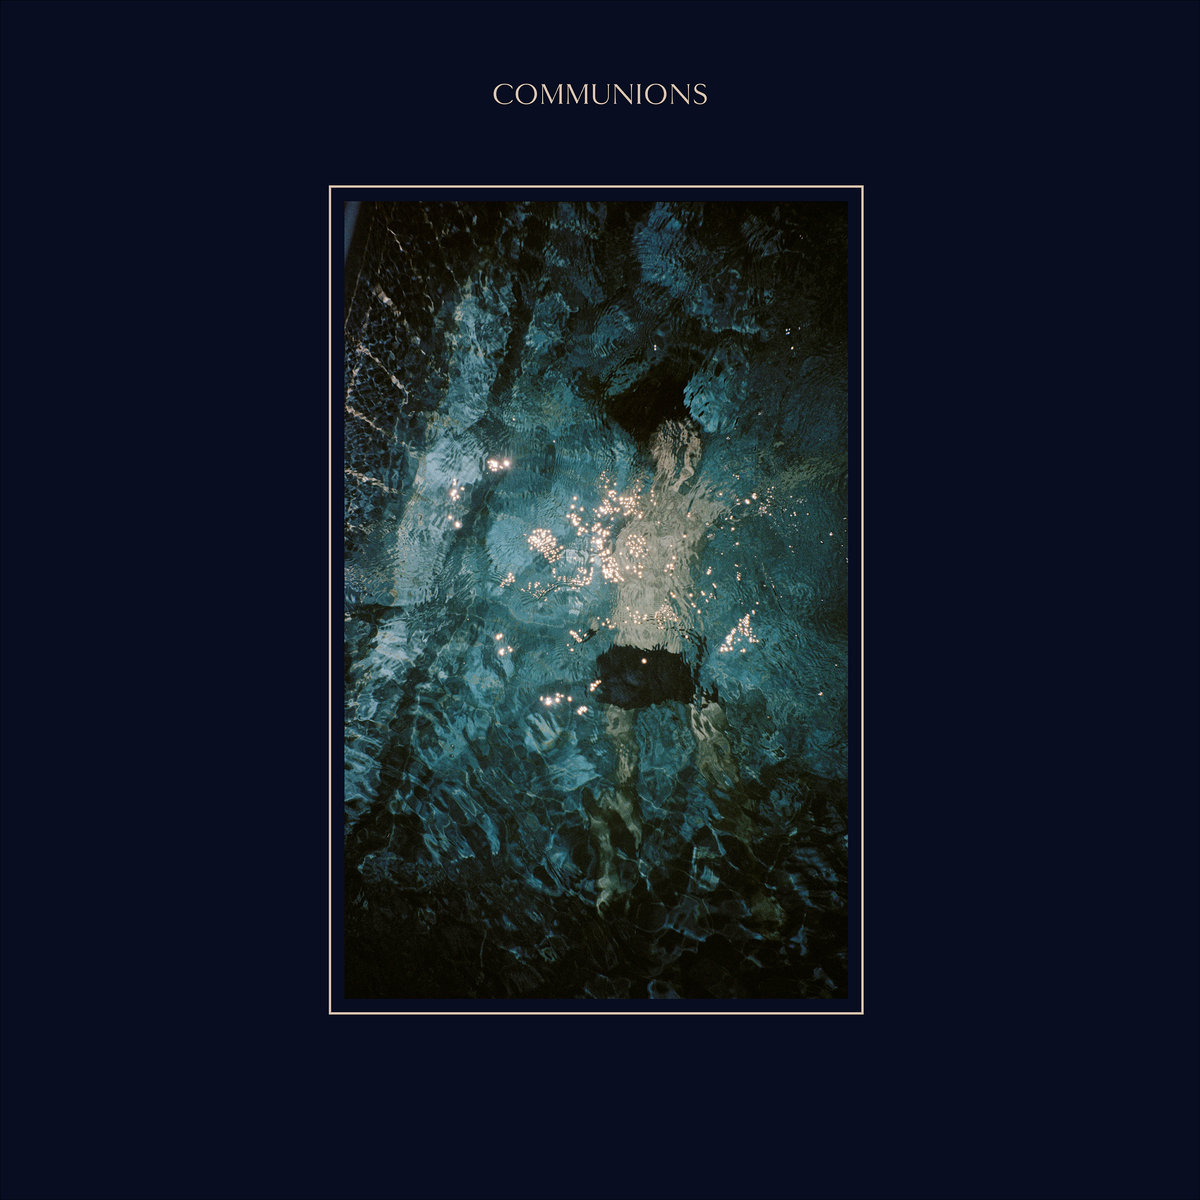 'Blue' by Communions, album review by Adam Williams.